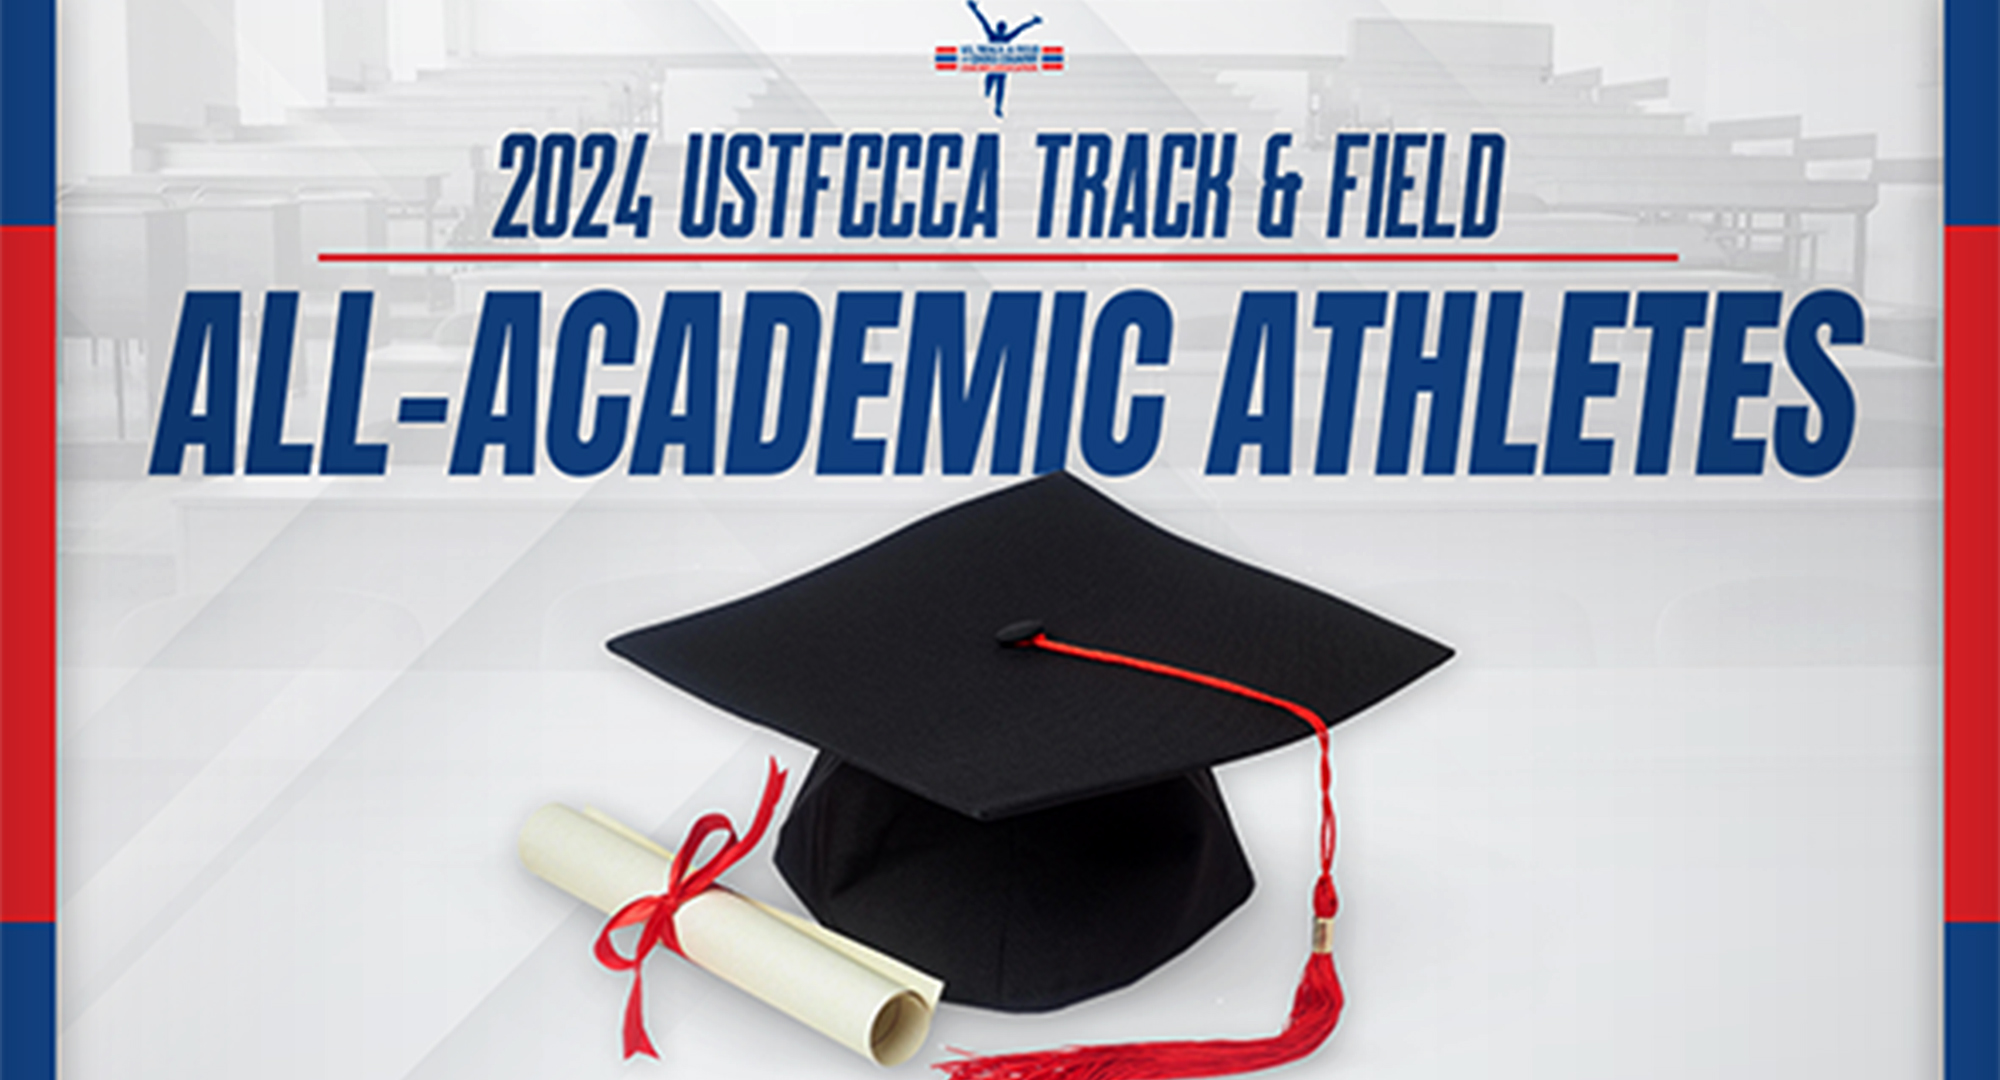 Concordia earned USTFCCCA All-Academic Team honors and had a trio of student-athletes named to the All-Academic List.